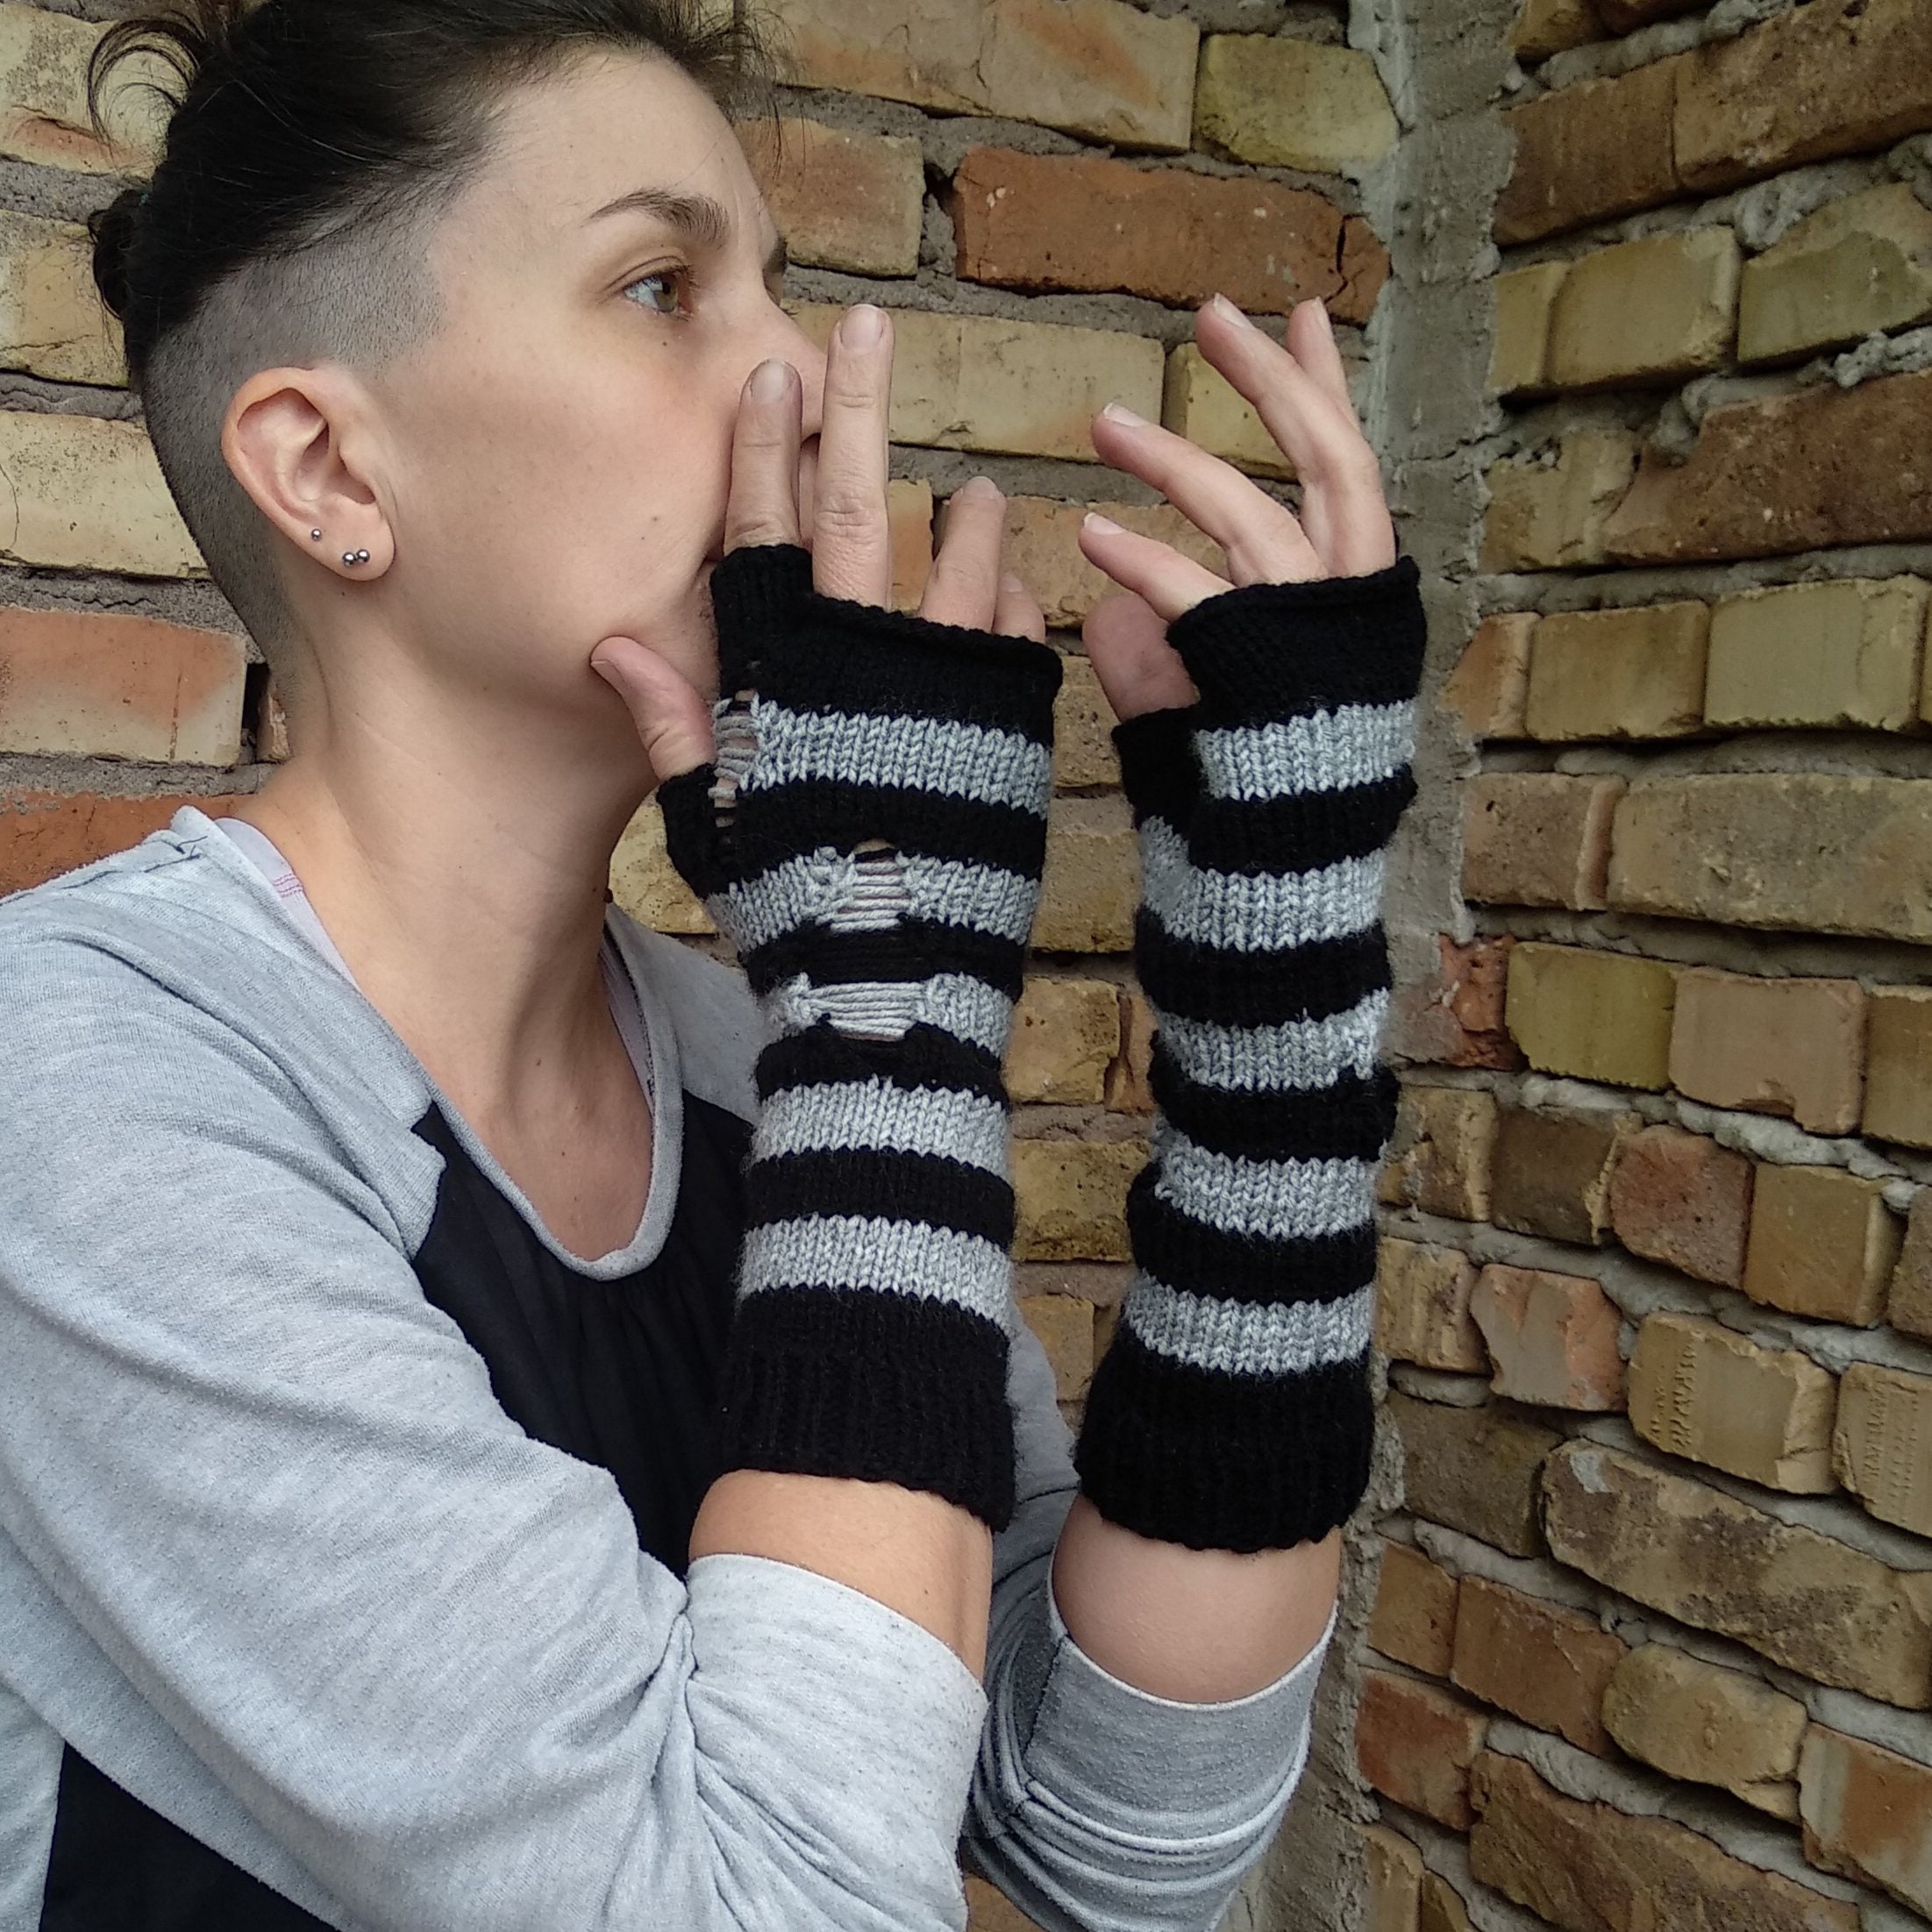 Striped Unisex Gray Arm Warmers, Emo Fingerless Gloves with Holes, Gothic Torned Mittens, Anime Clothing, Halloween Costume